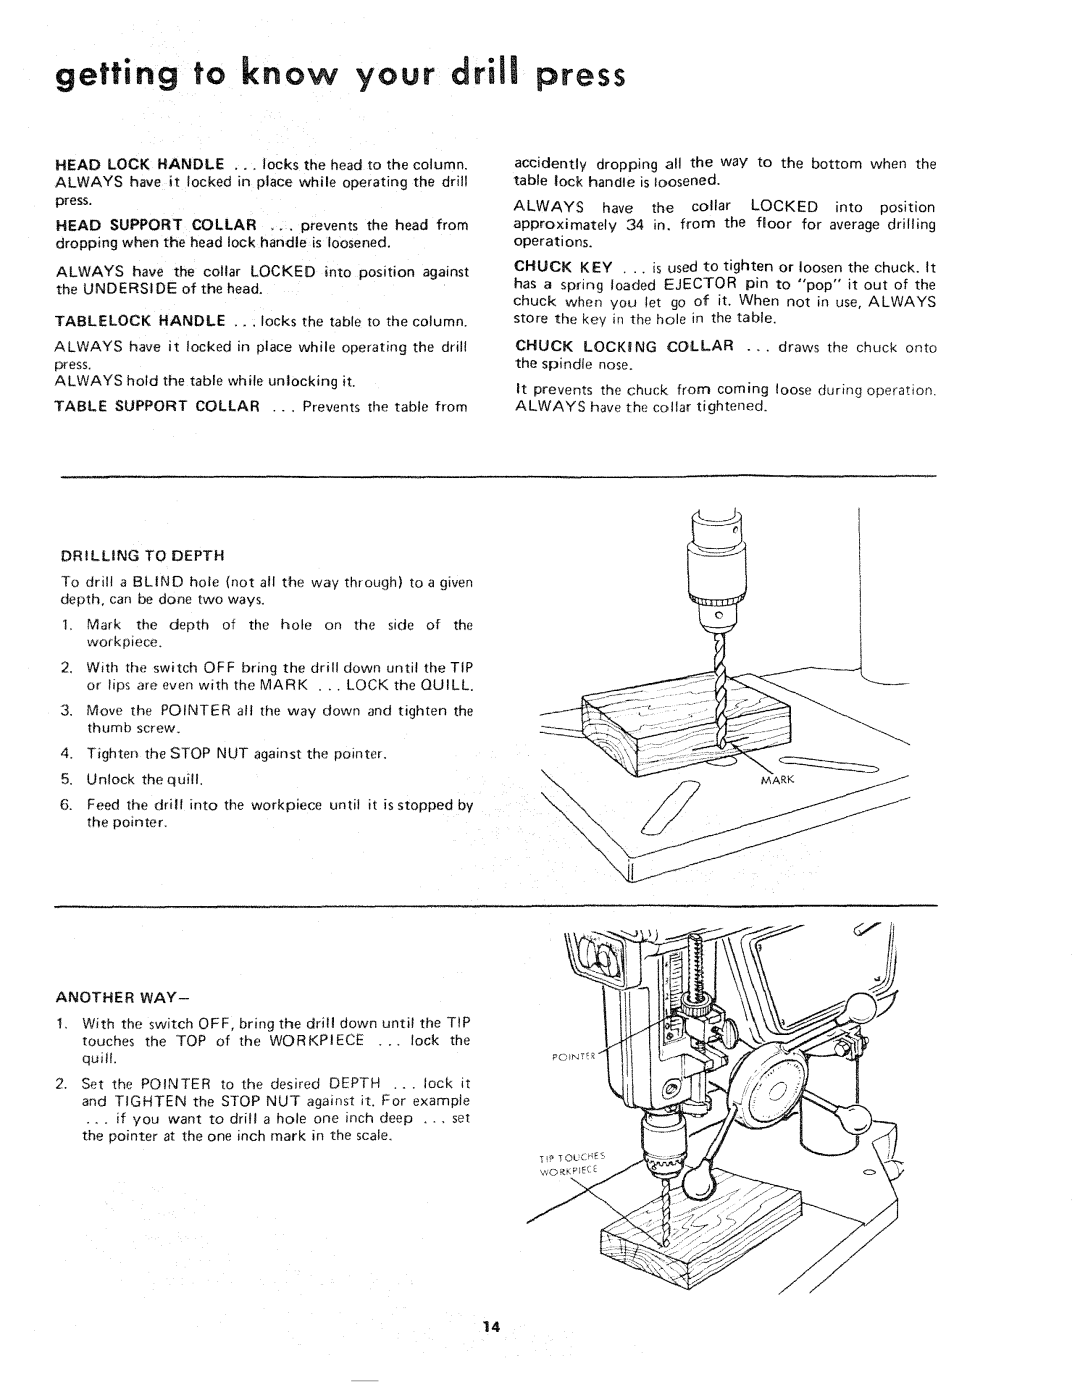 Sears 113.21371 manual getting to know your drill press, HEAD LOCK HANDLE ... locks the head to the column, Another Way 